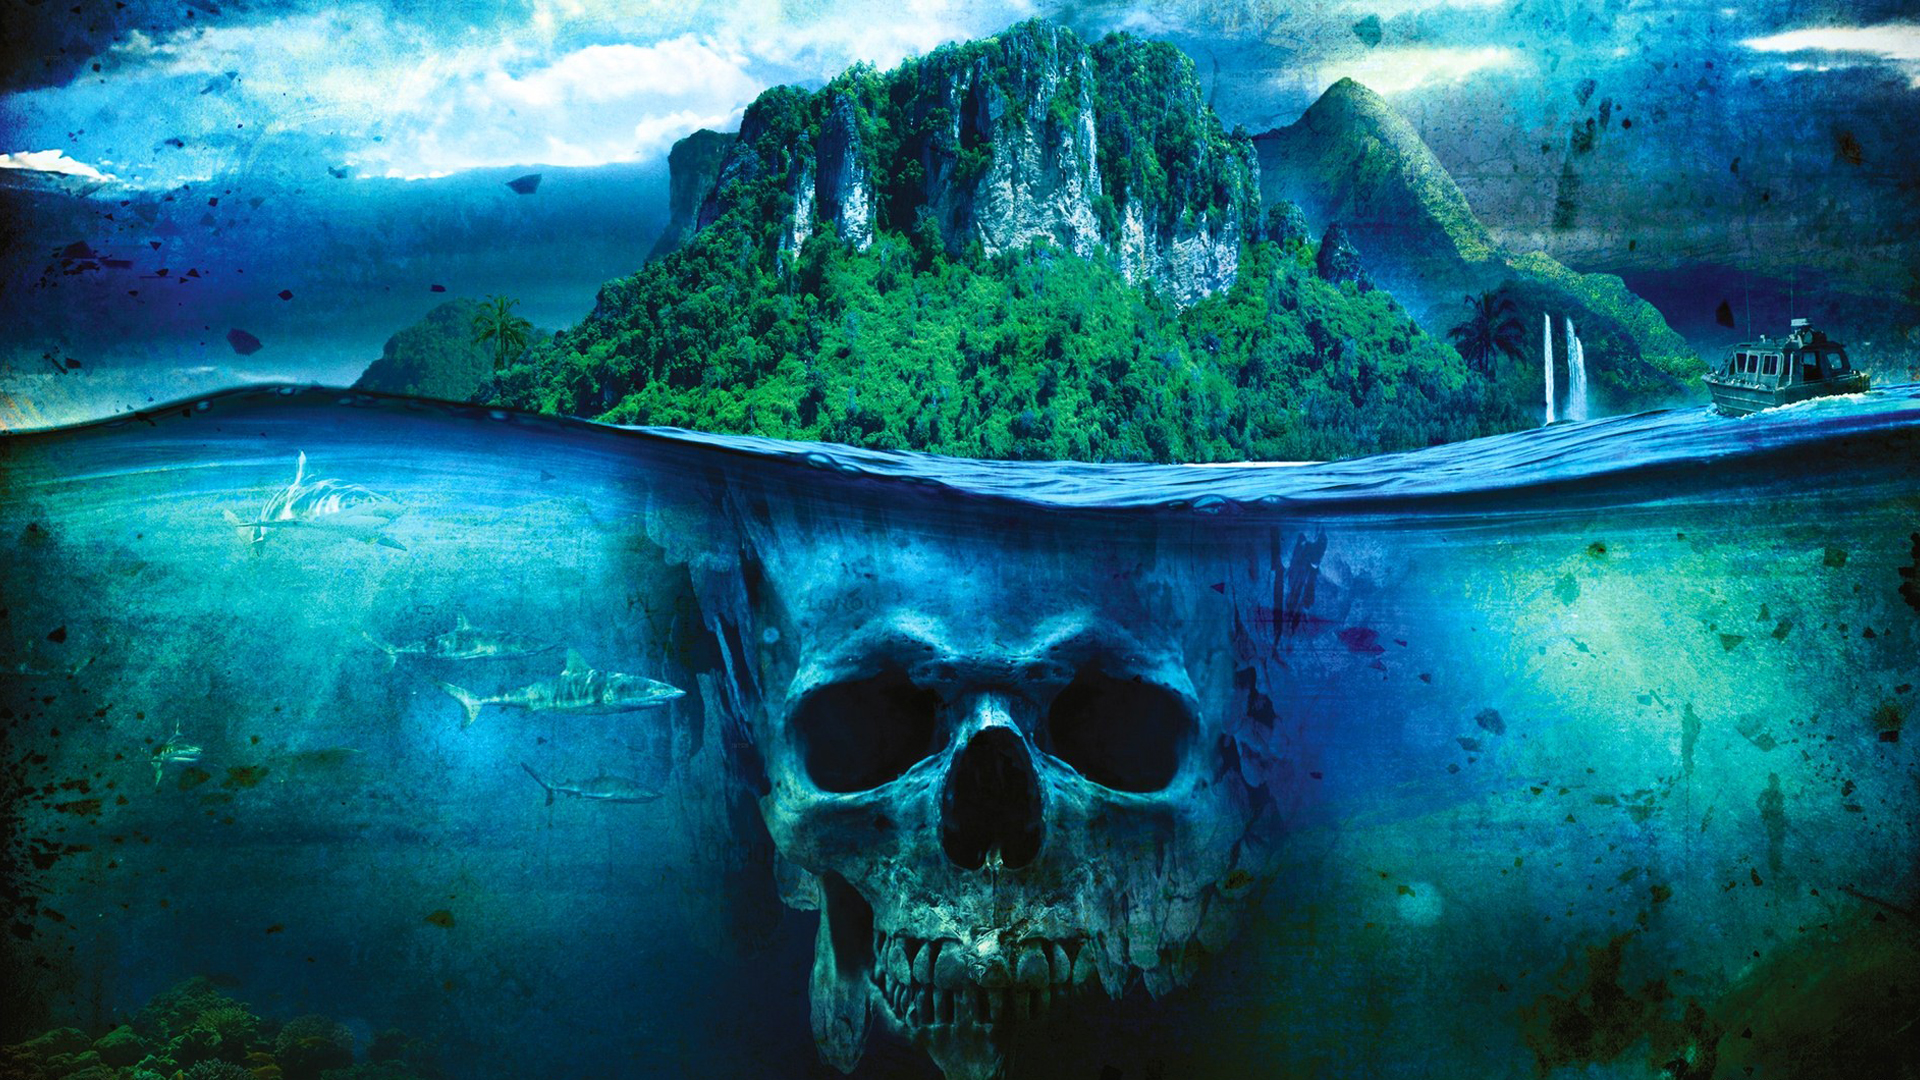 Far Cry 3 Computer Wallpapers Desktop Backgrounds 1920x1080 ID 1920x1080